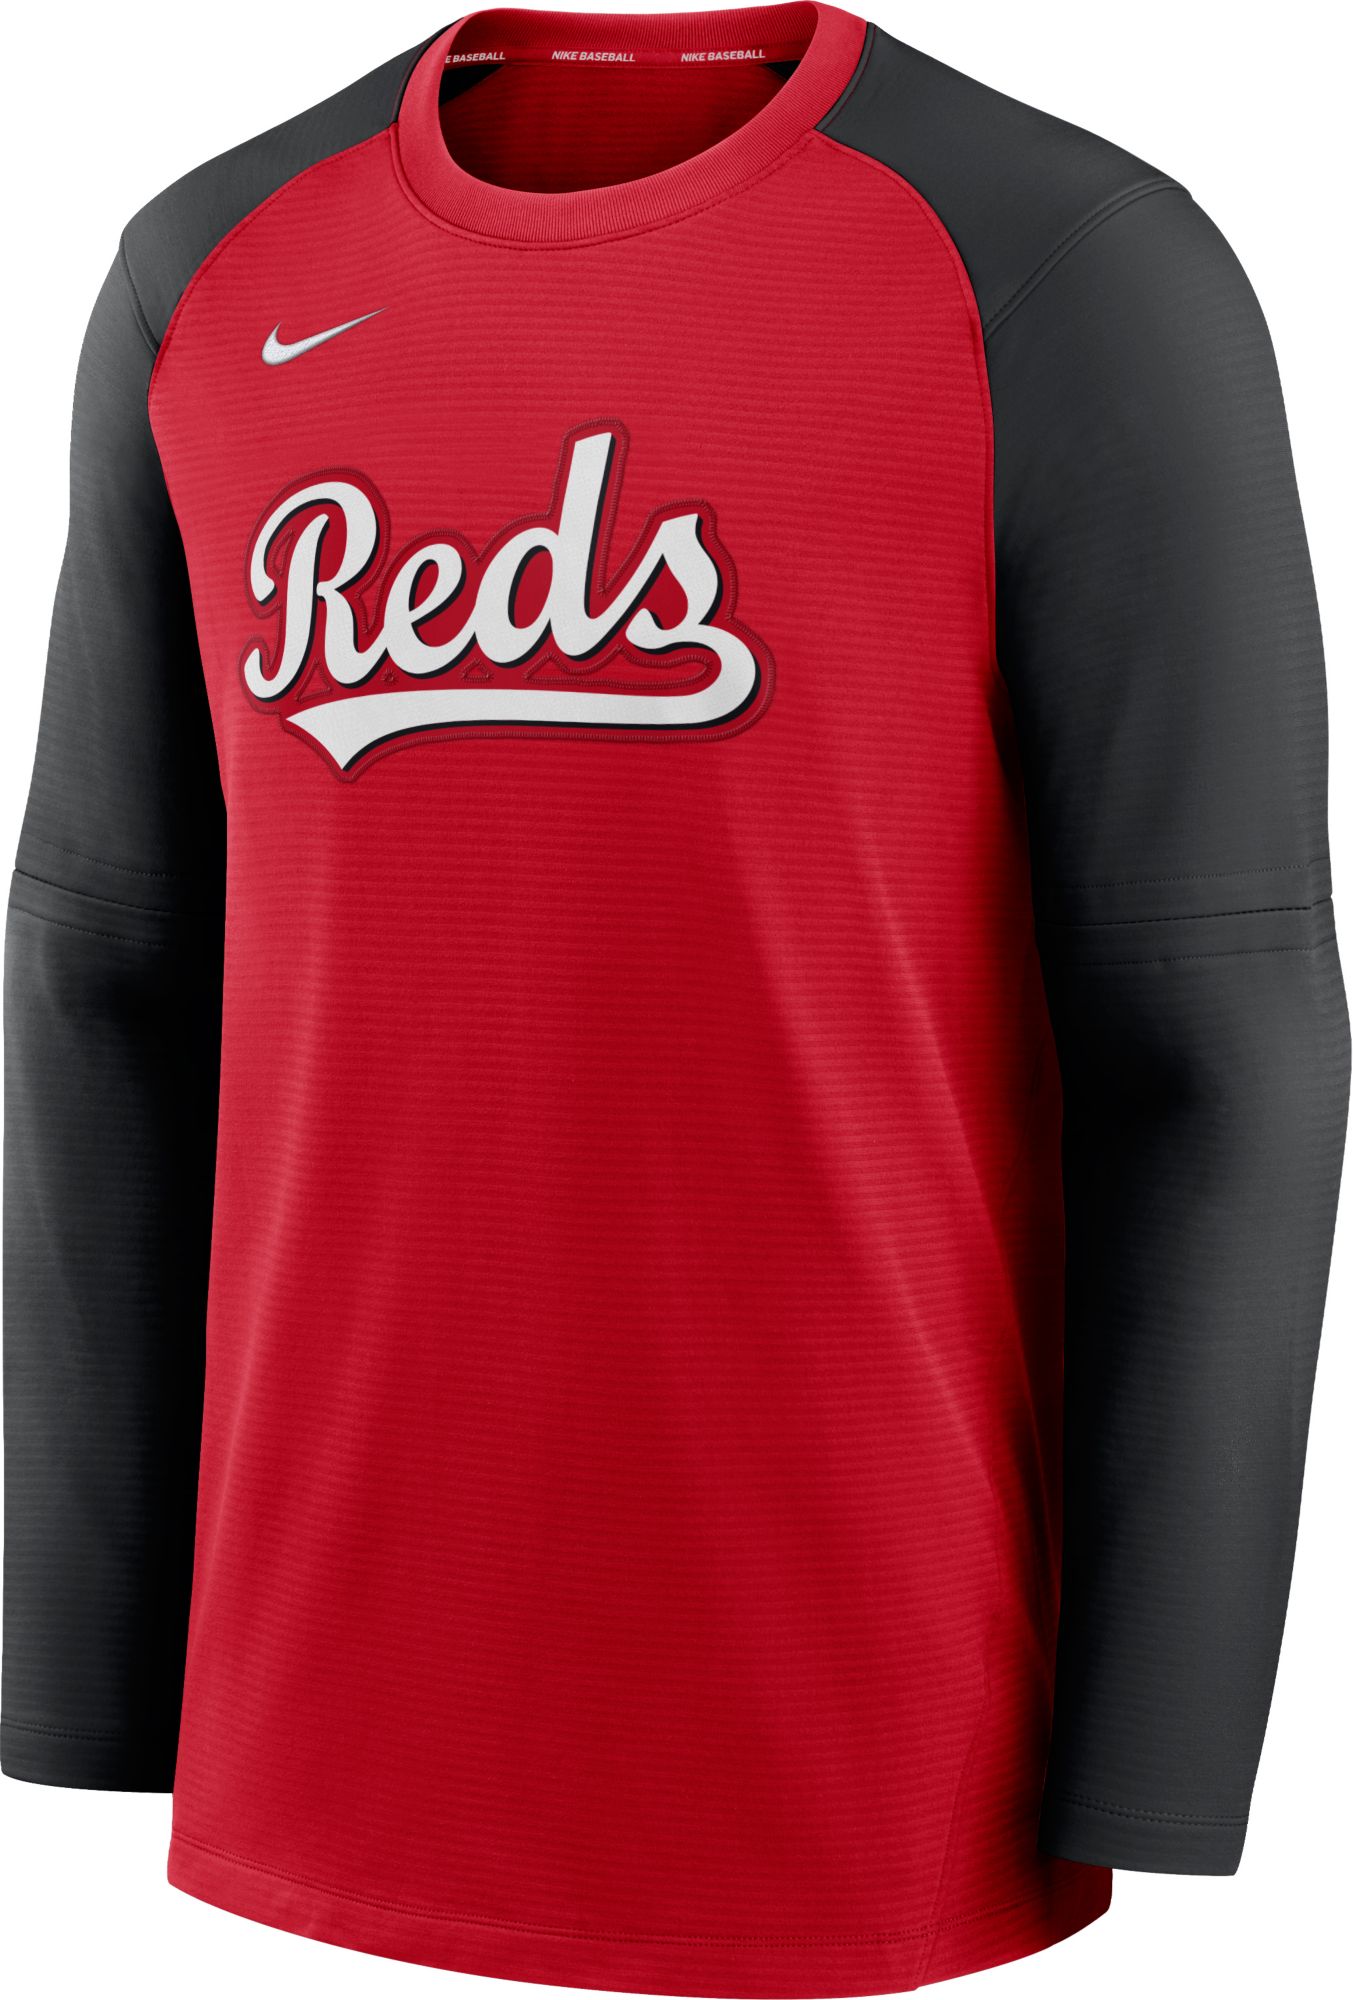 authentic reds jersey